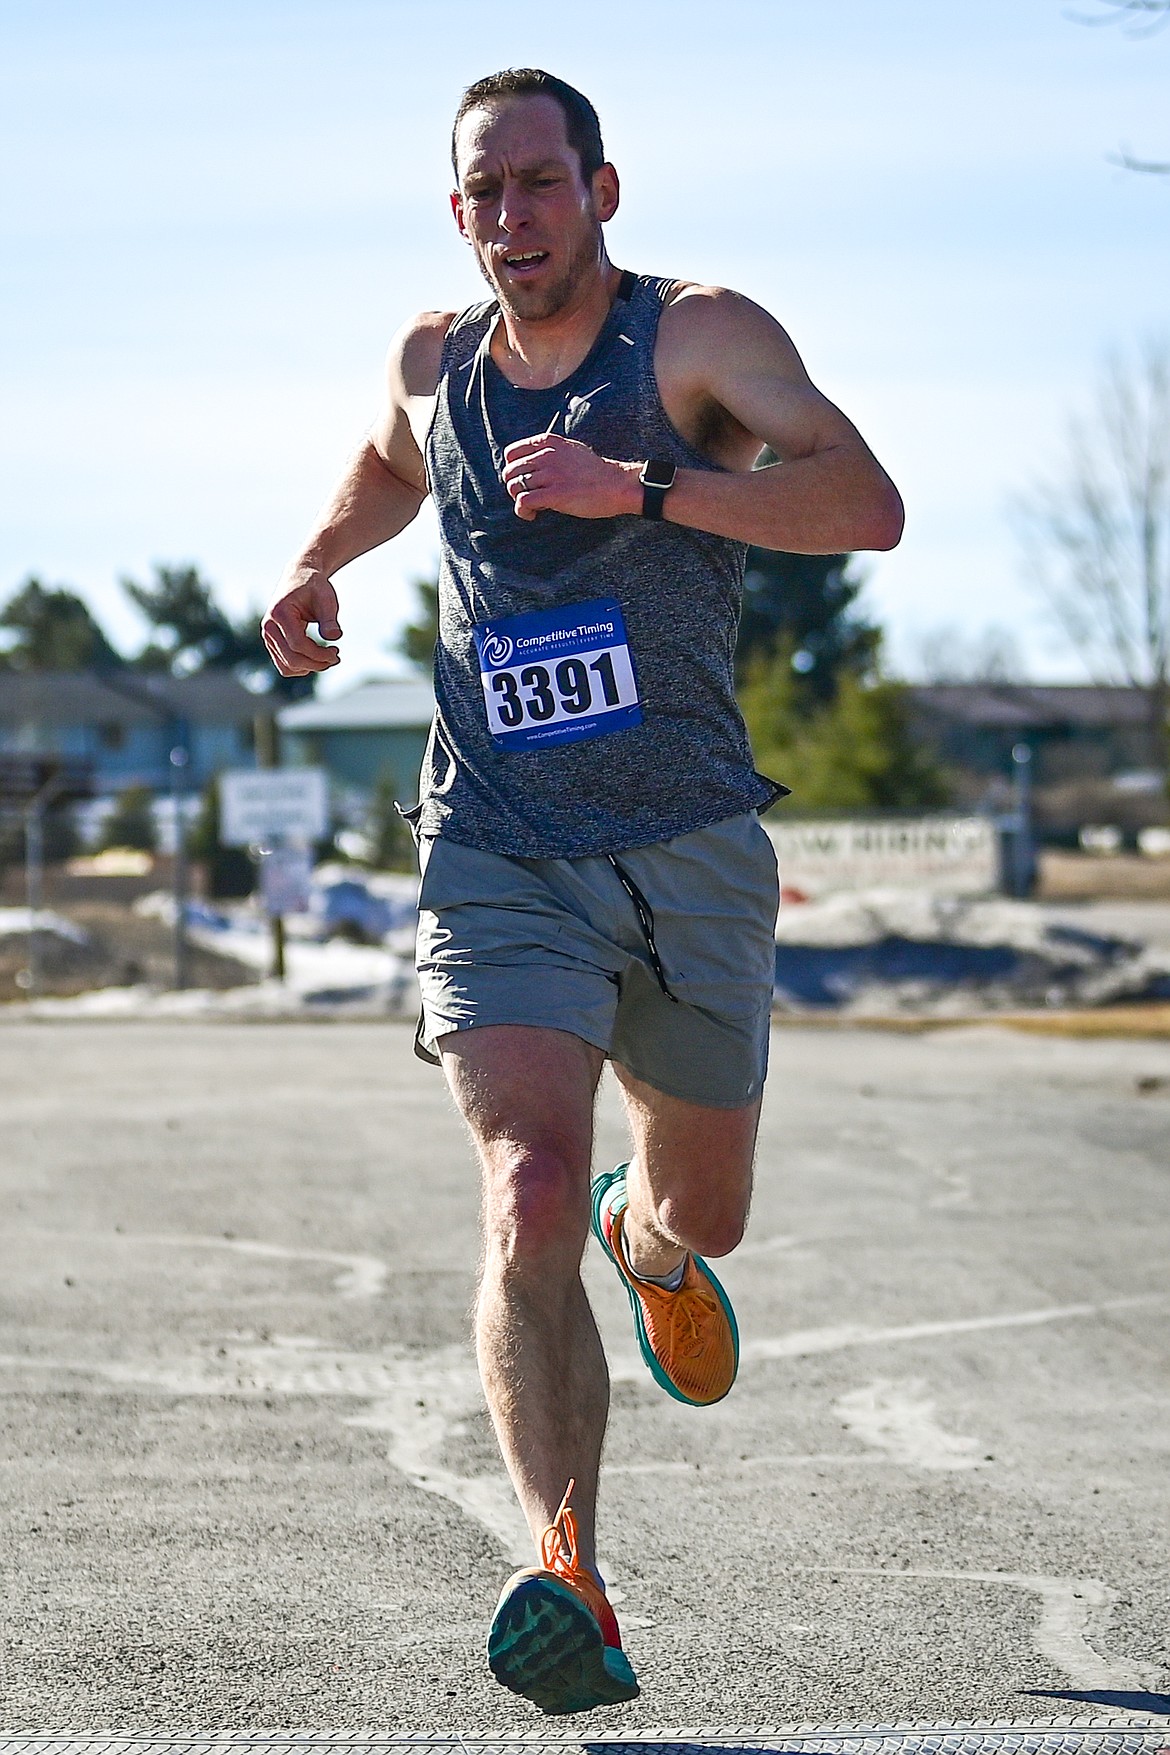 Brad Dolesh crosses the finish line in first place in the 5K run at Cloverfest in Columbia Falls on Saturday, March 16. (Casey Kreider/Daily Inter Lake)